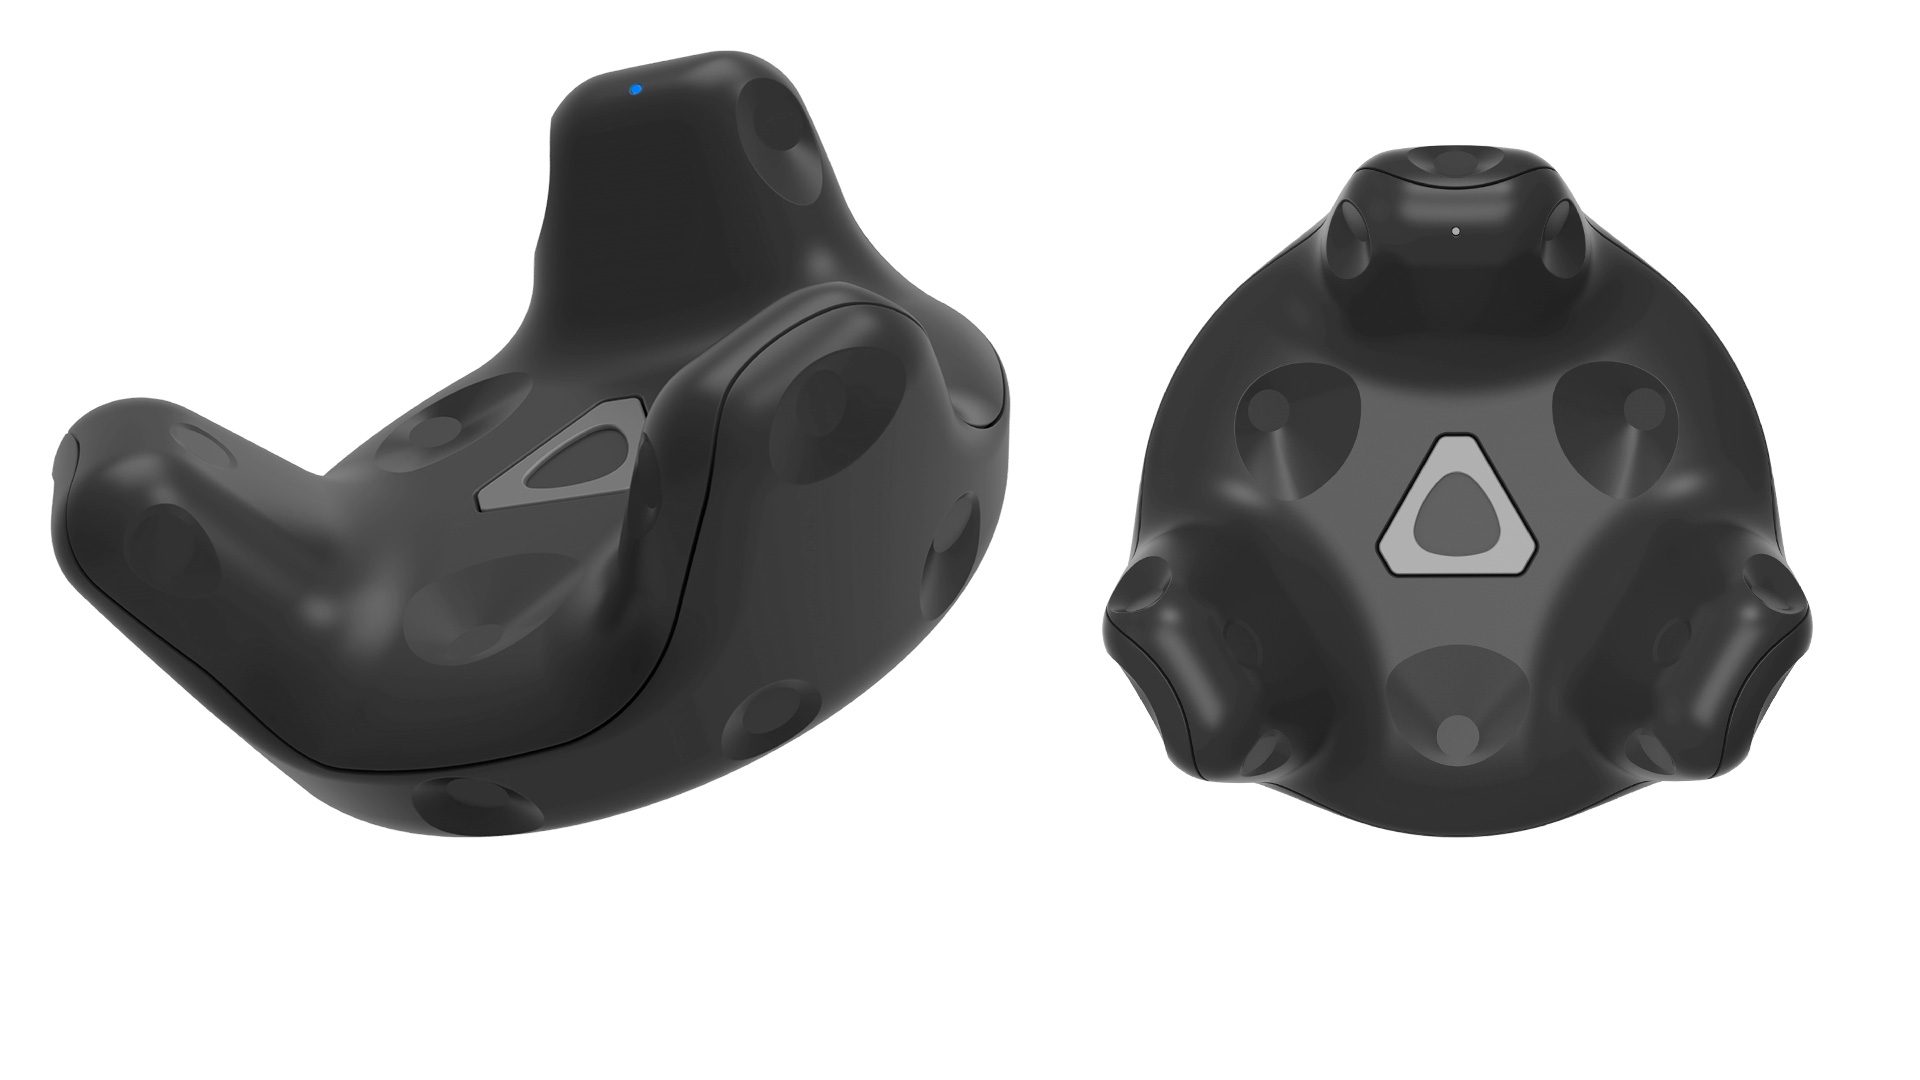 HTC Vive Tracker Enables a Bevy of Tracked Accessories - Road to VR